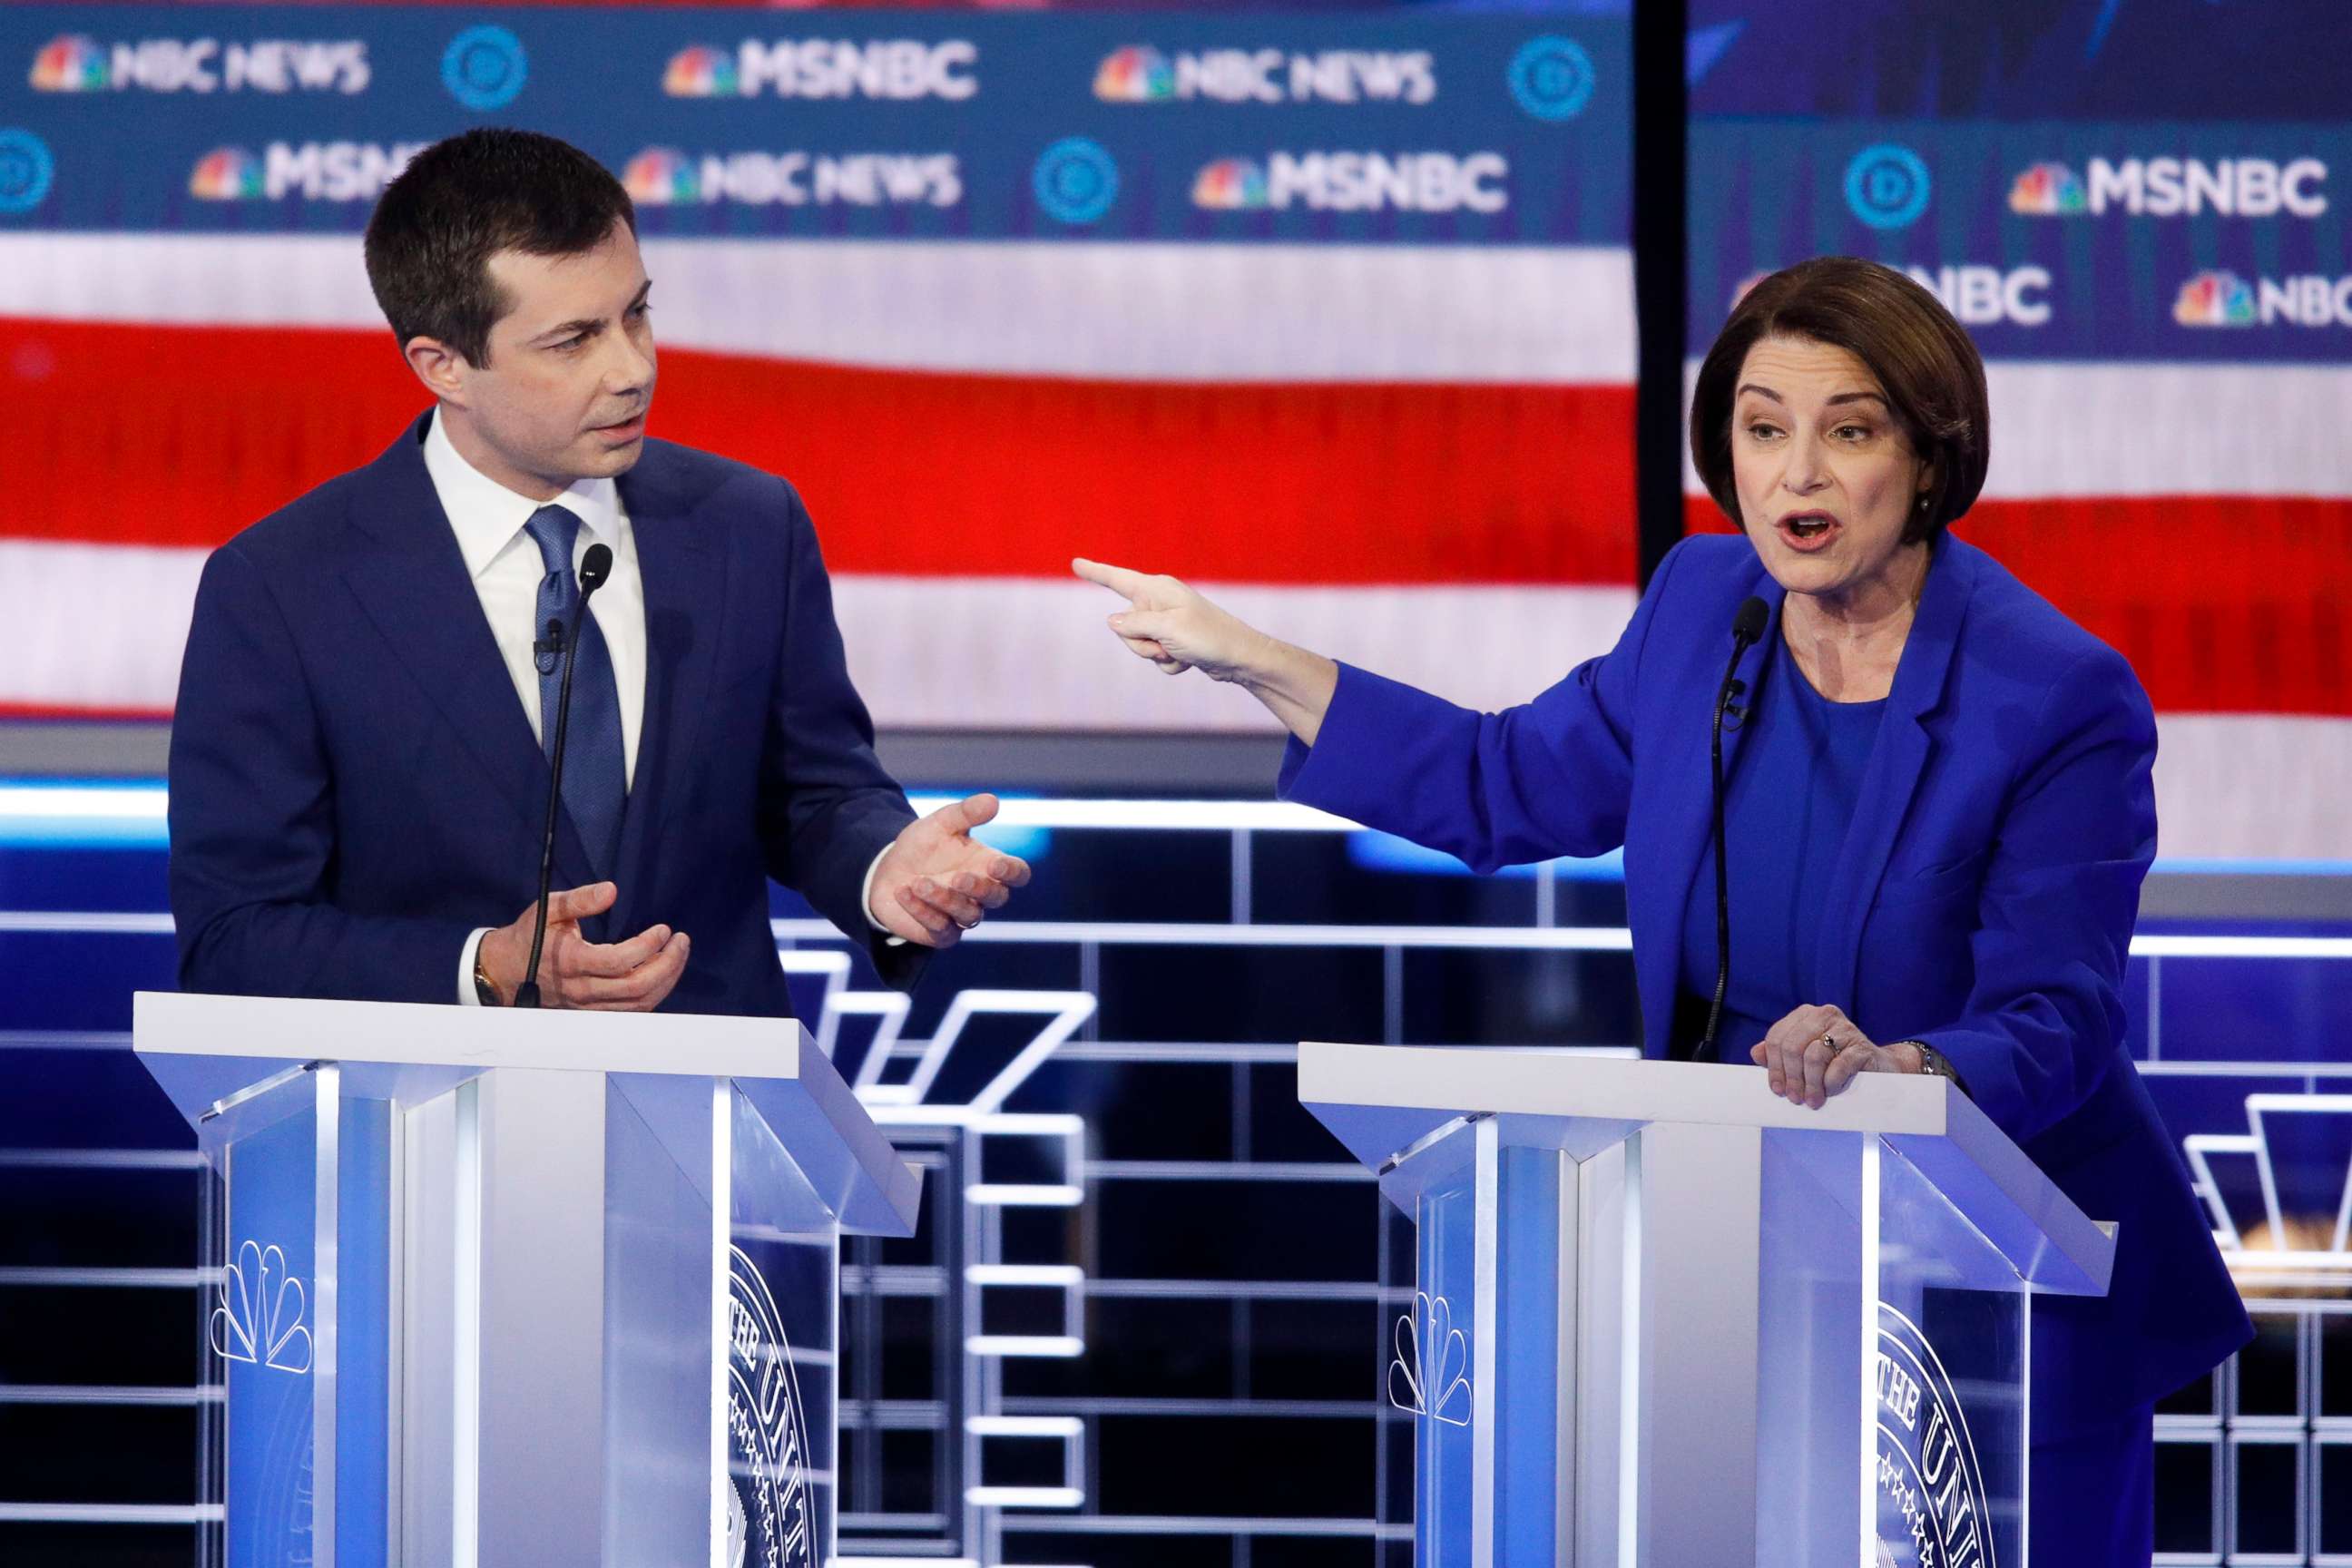 PHOTO: Democratic presidential candidates, Sen. Amy Klobuchar, D-Minn., right, speaks as former South Bend Mayor Pete Buttigieg looks on during a Democratic presidential primary debate, Feb. 19, 2020, in Las Vegas, hosted by NBC News and MSNBC.